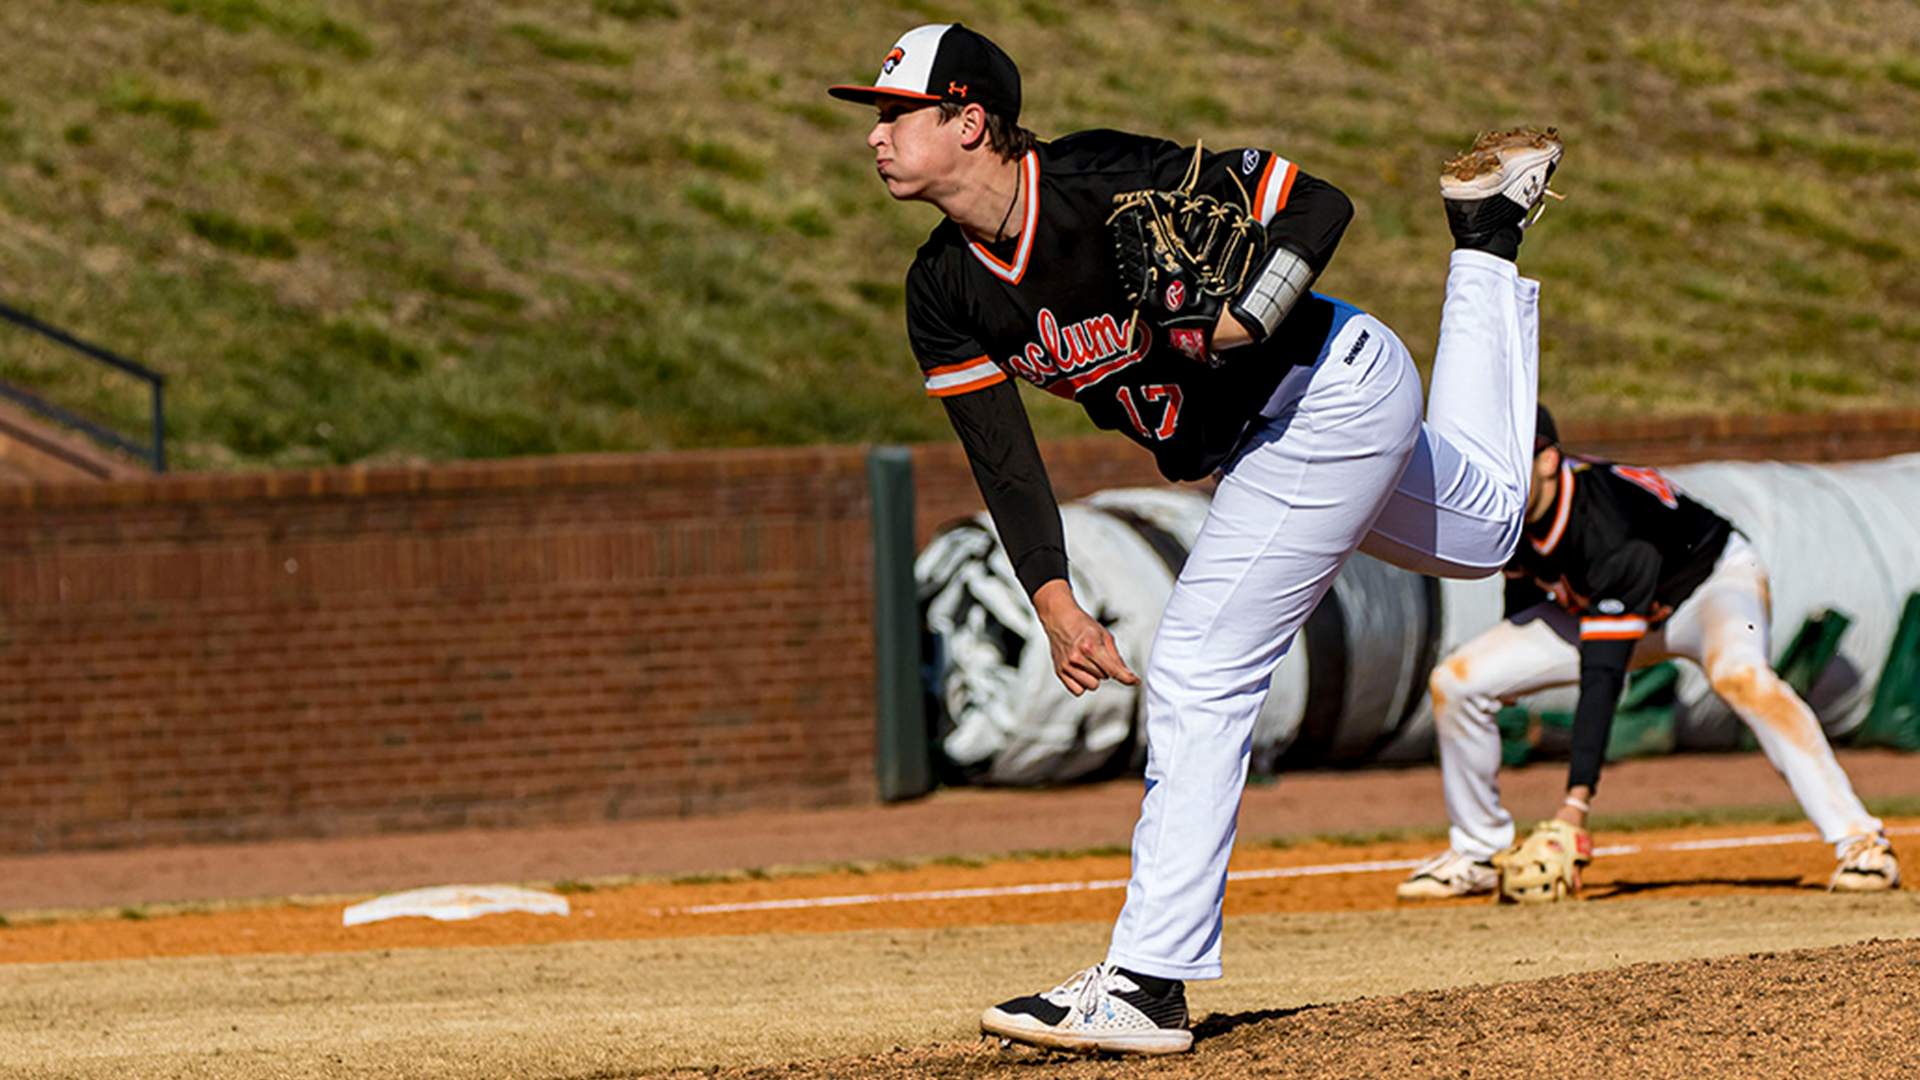 Drew Sliwinski pitched a 3-inning save in Tusculum's 6-4 win over No. 36 Illinois Springfield (photo by Chuck Williams)